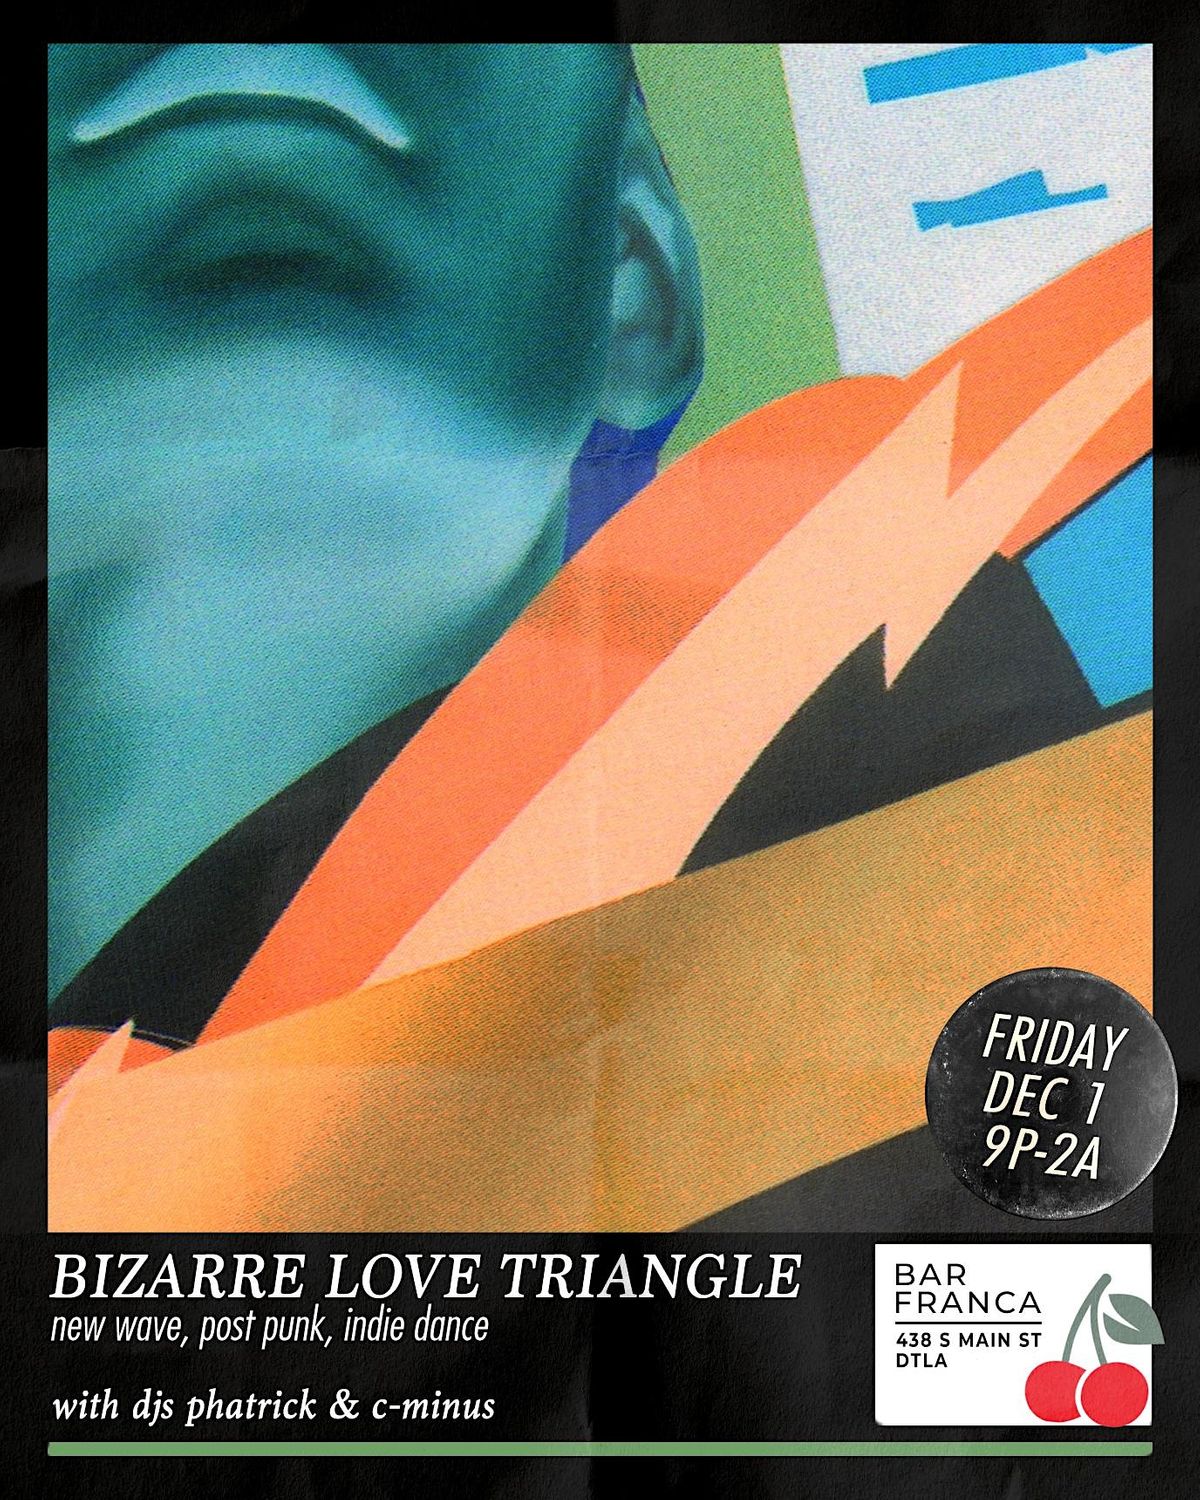 BIZARRE LOVE TRIANGLE: New Wave, Post Punk, Indie Rock Dance Party